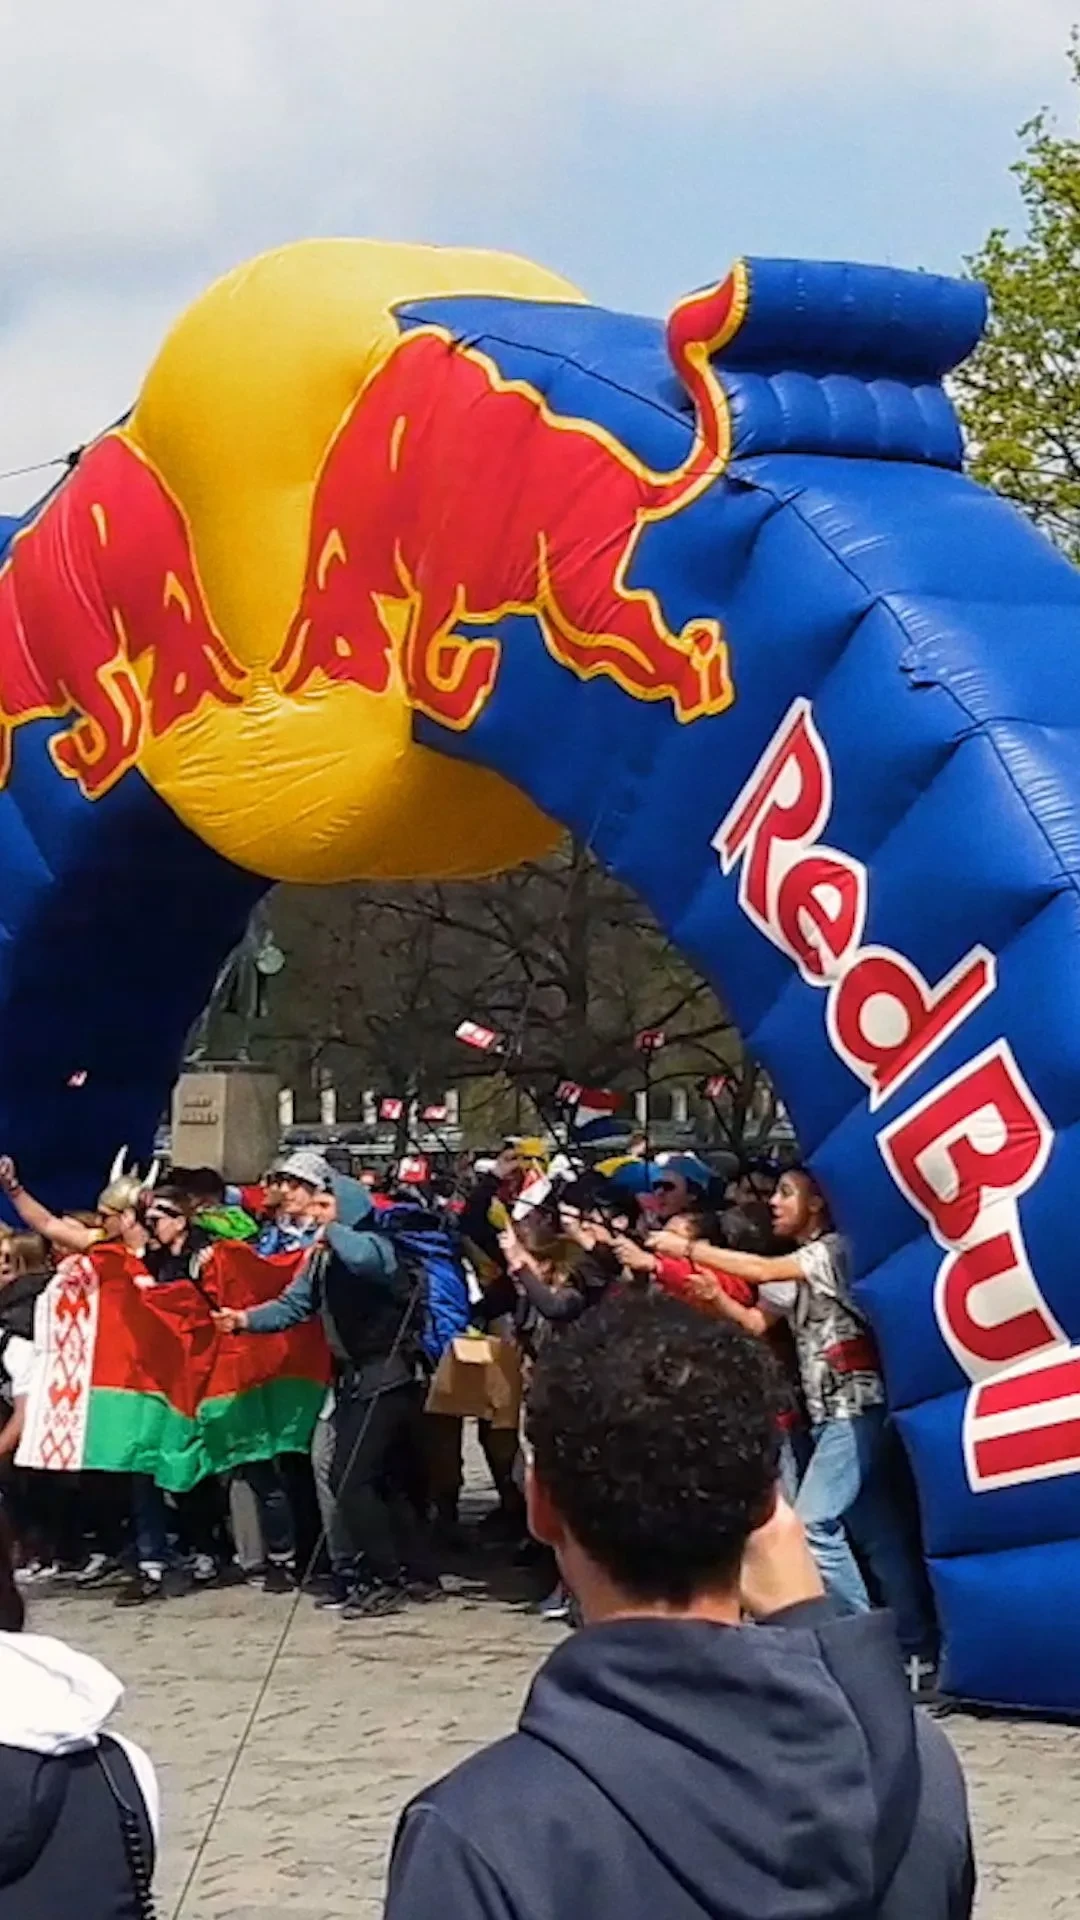 Red Bull Can You Make It? – Die Challenge des Jahres